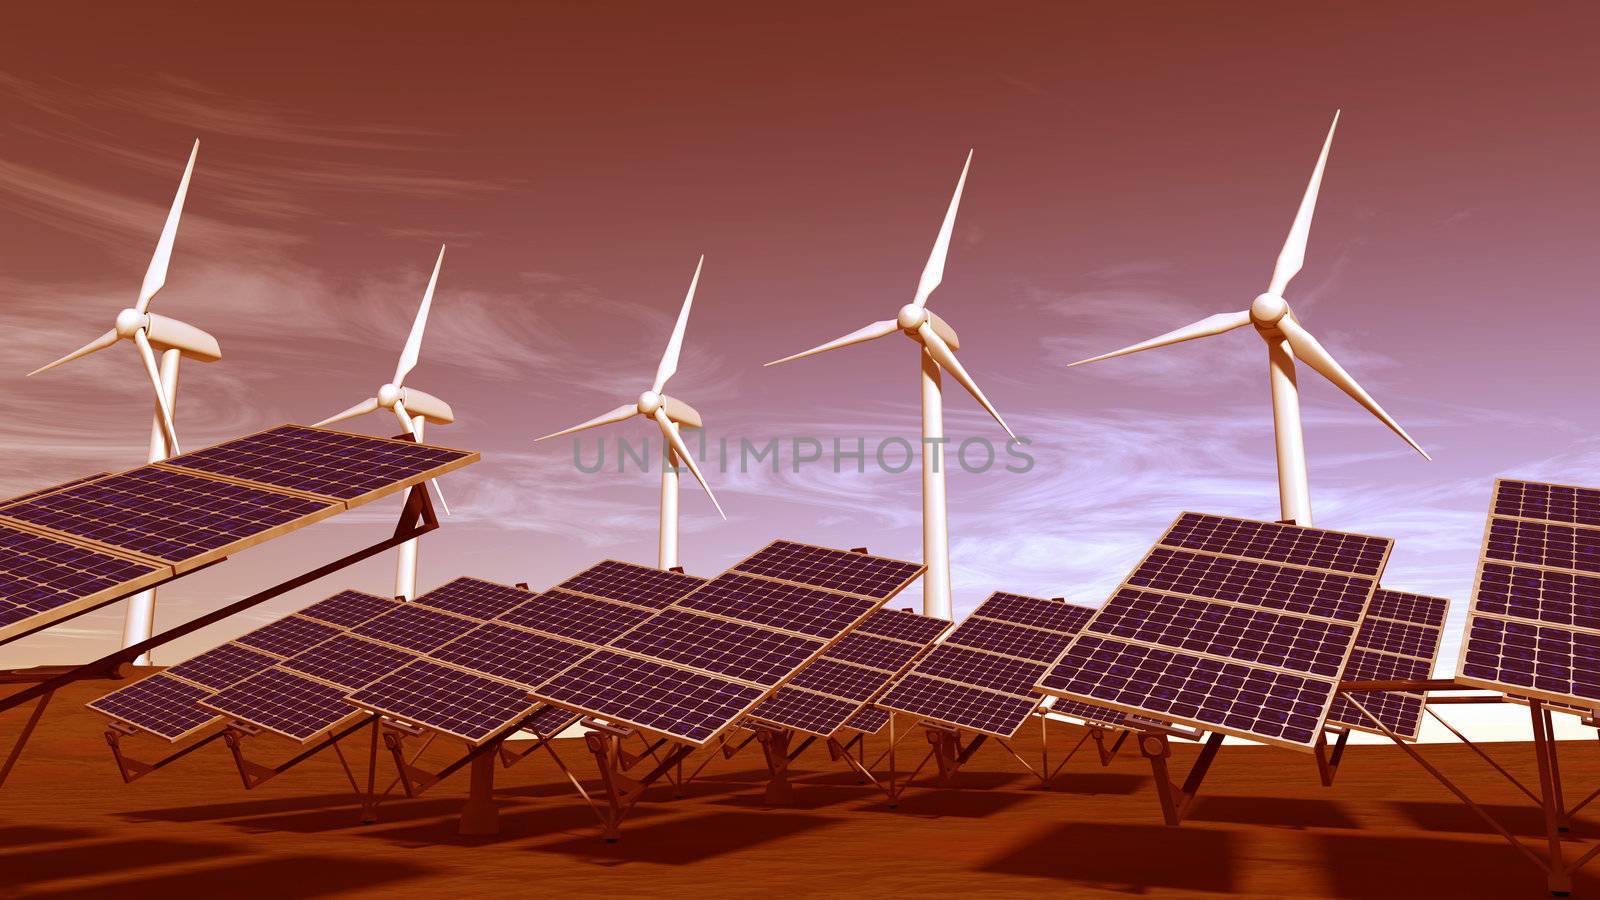 Wind turbines and articulated solar panels with a sunset sky